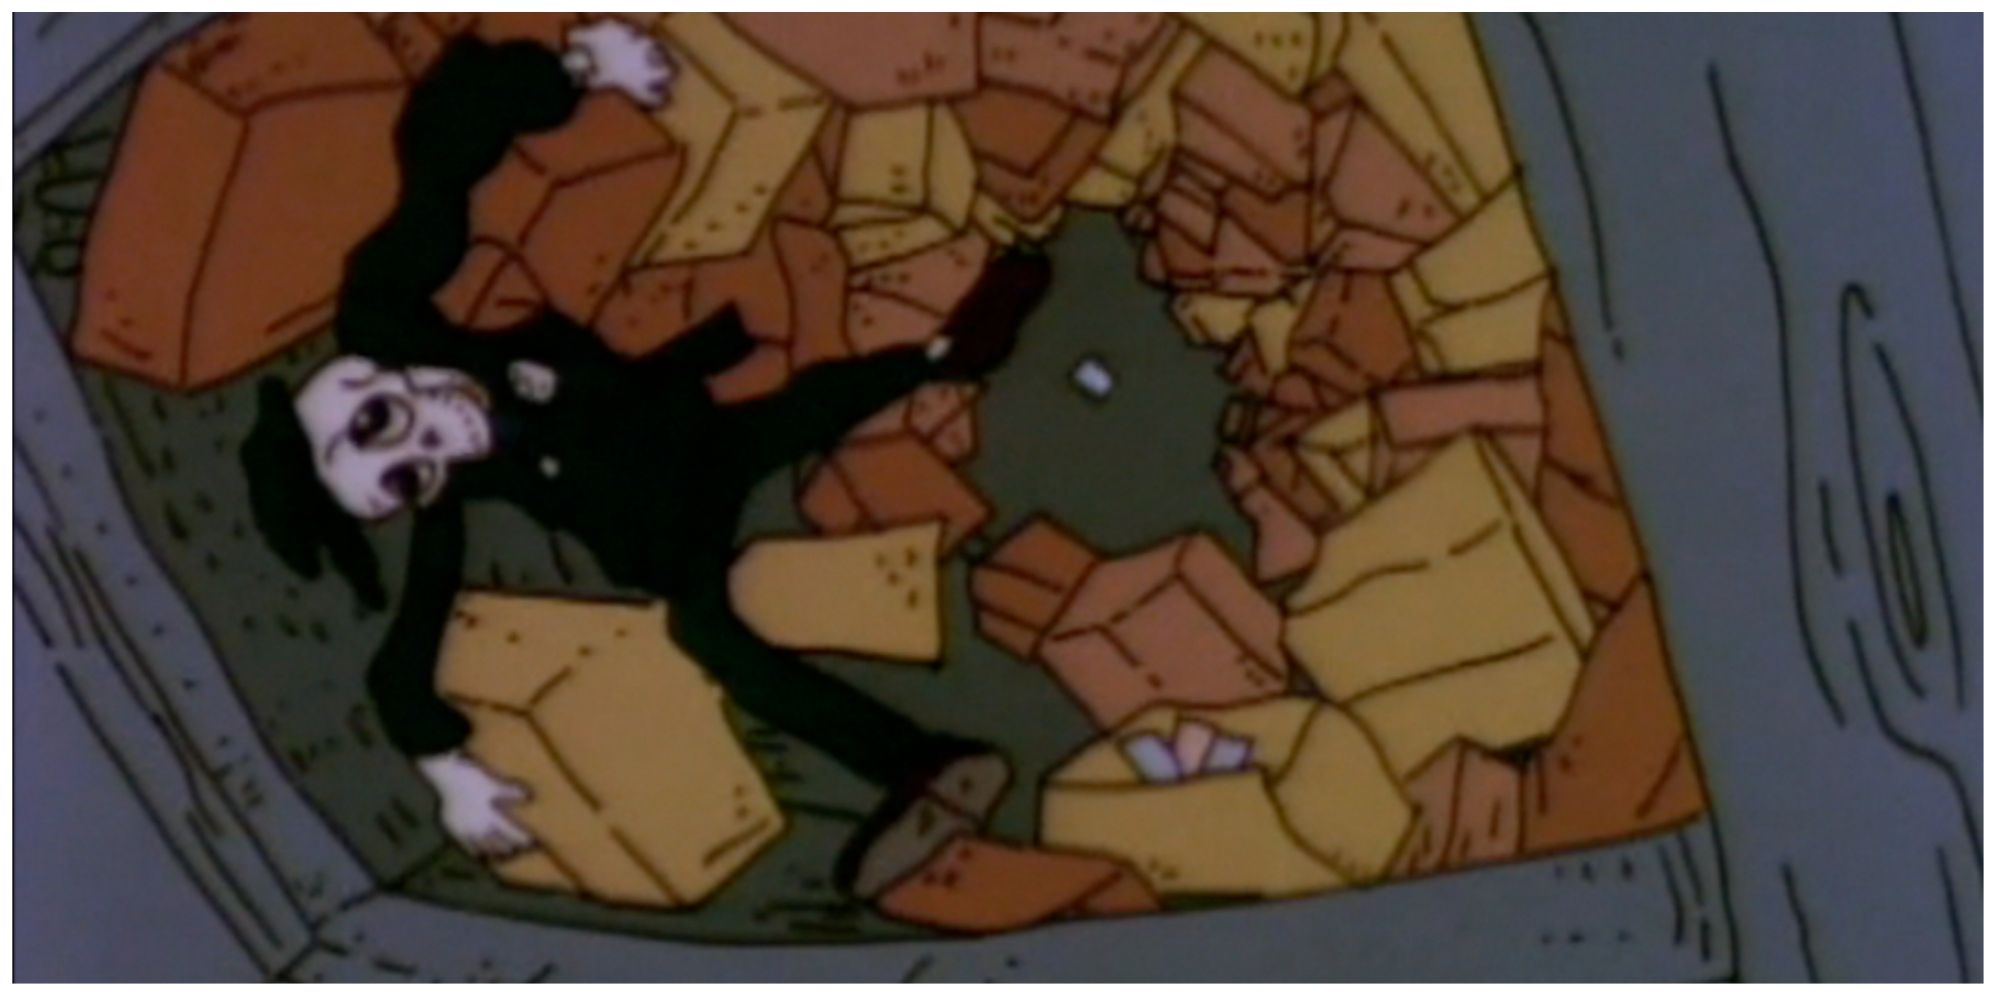 Dead postal worker in the Rugrats episode: Special Delivery